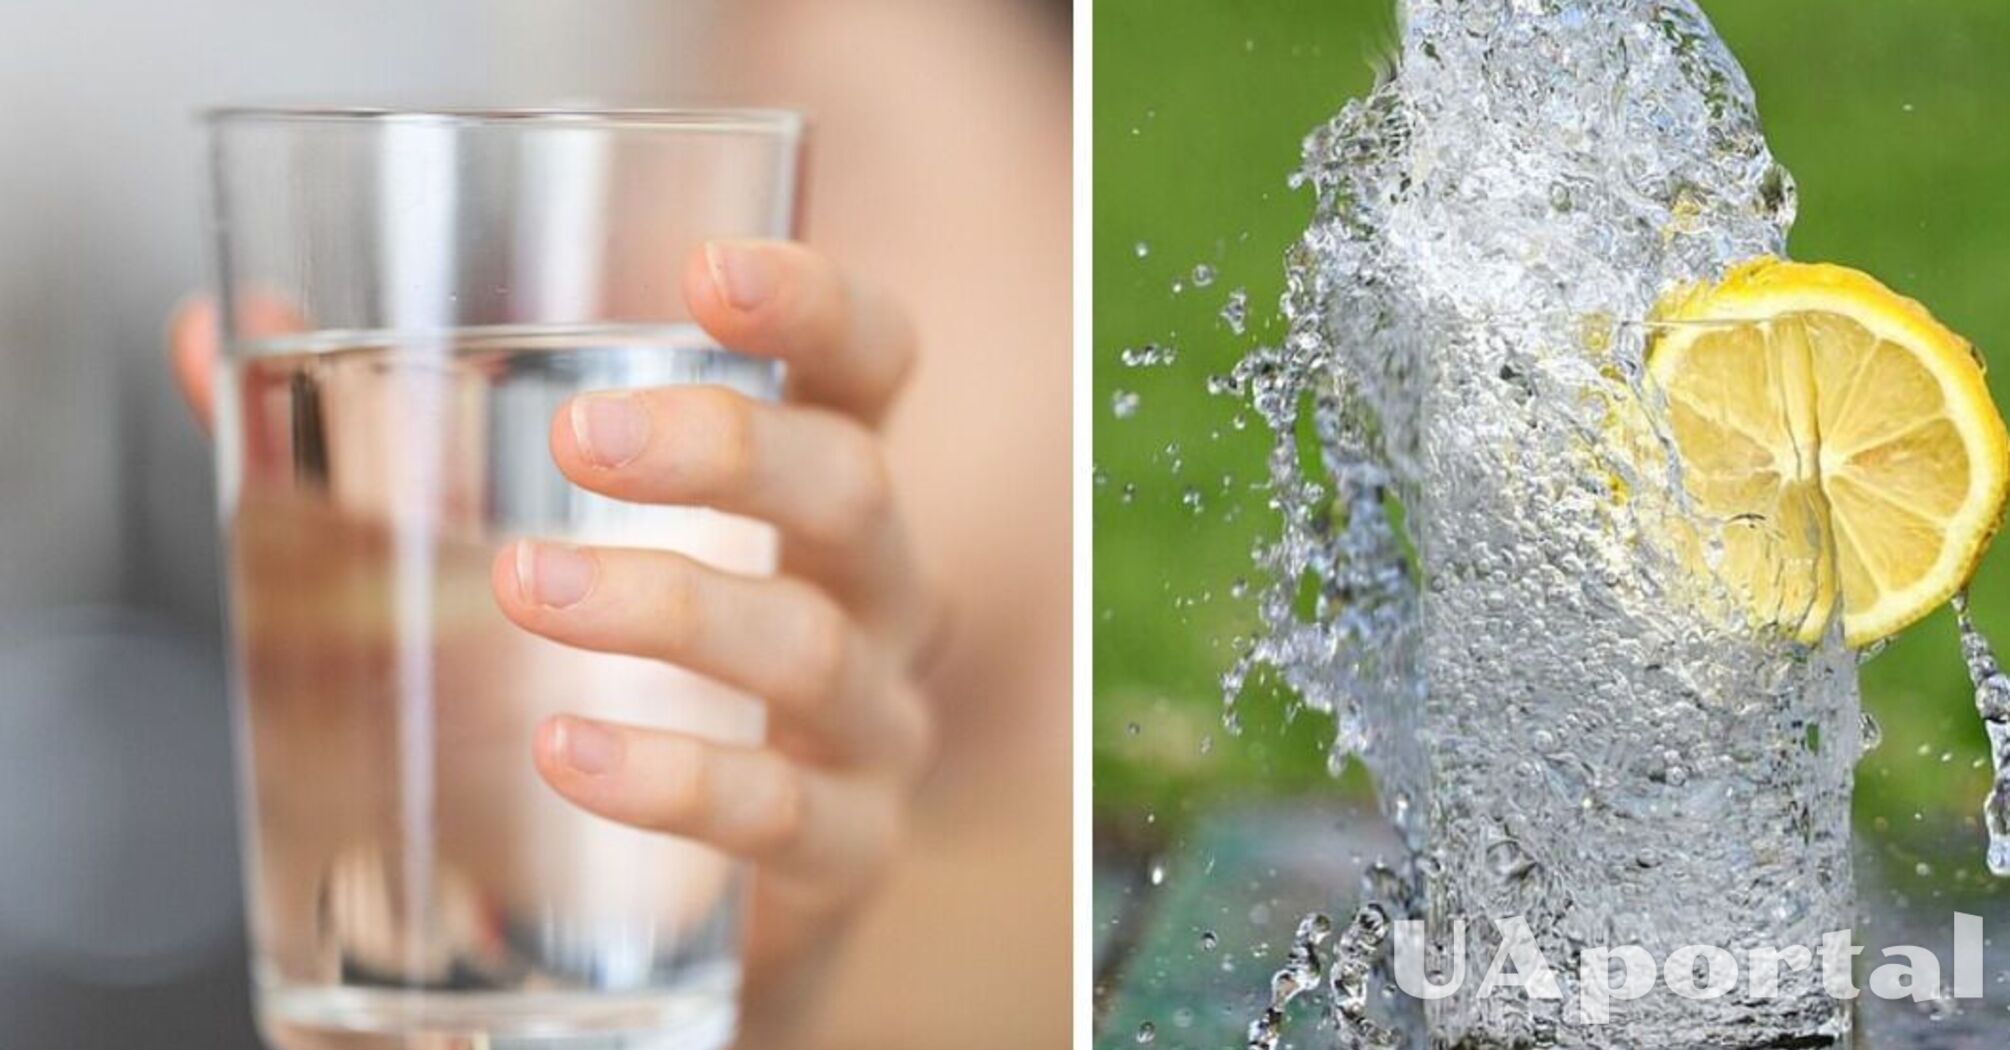 A nutritionist answered how much water you need to drink daily to lose weight